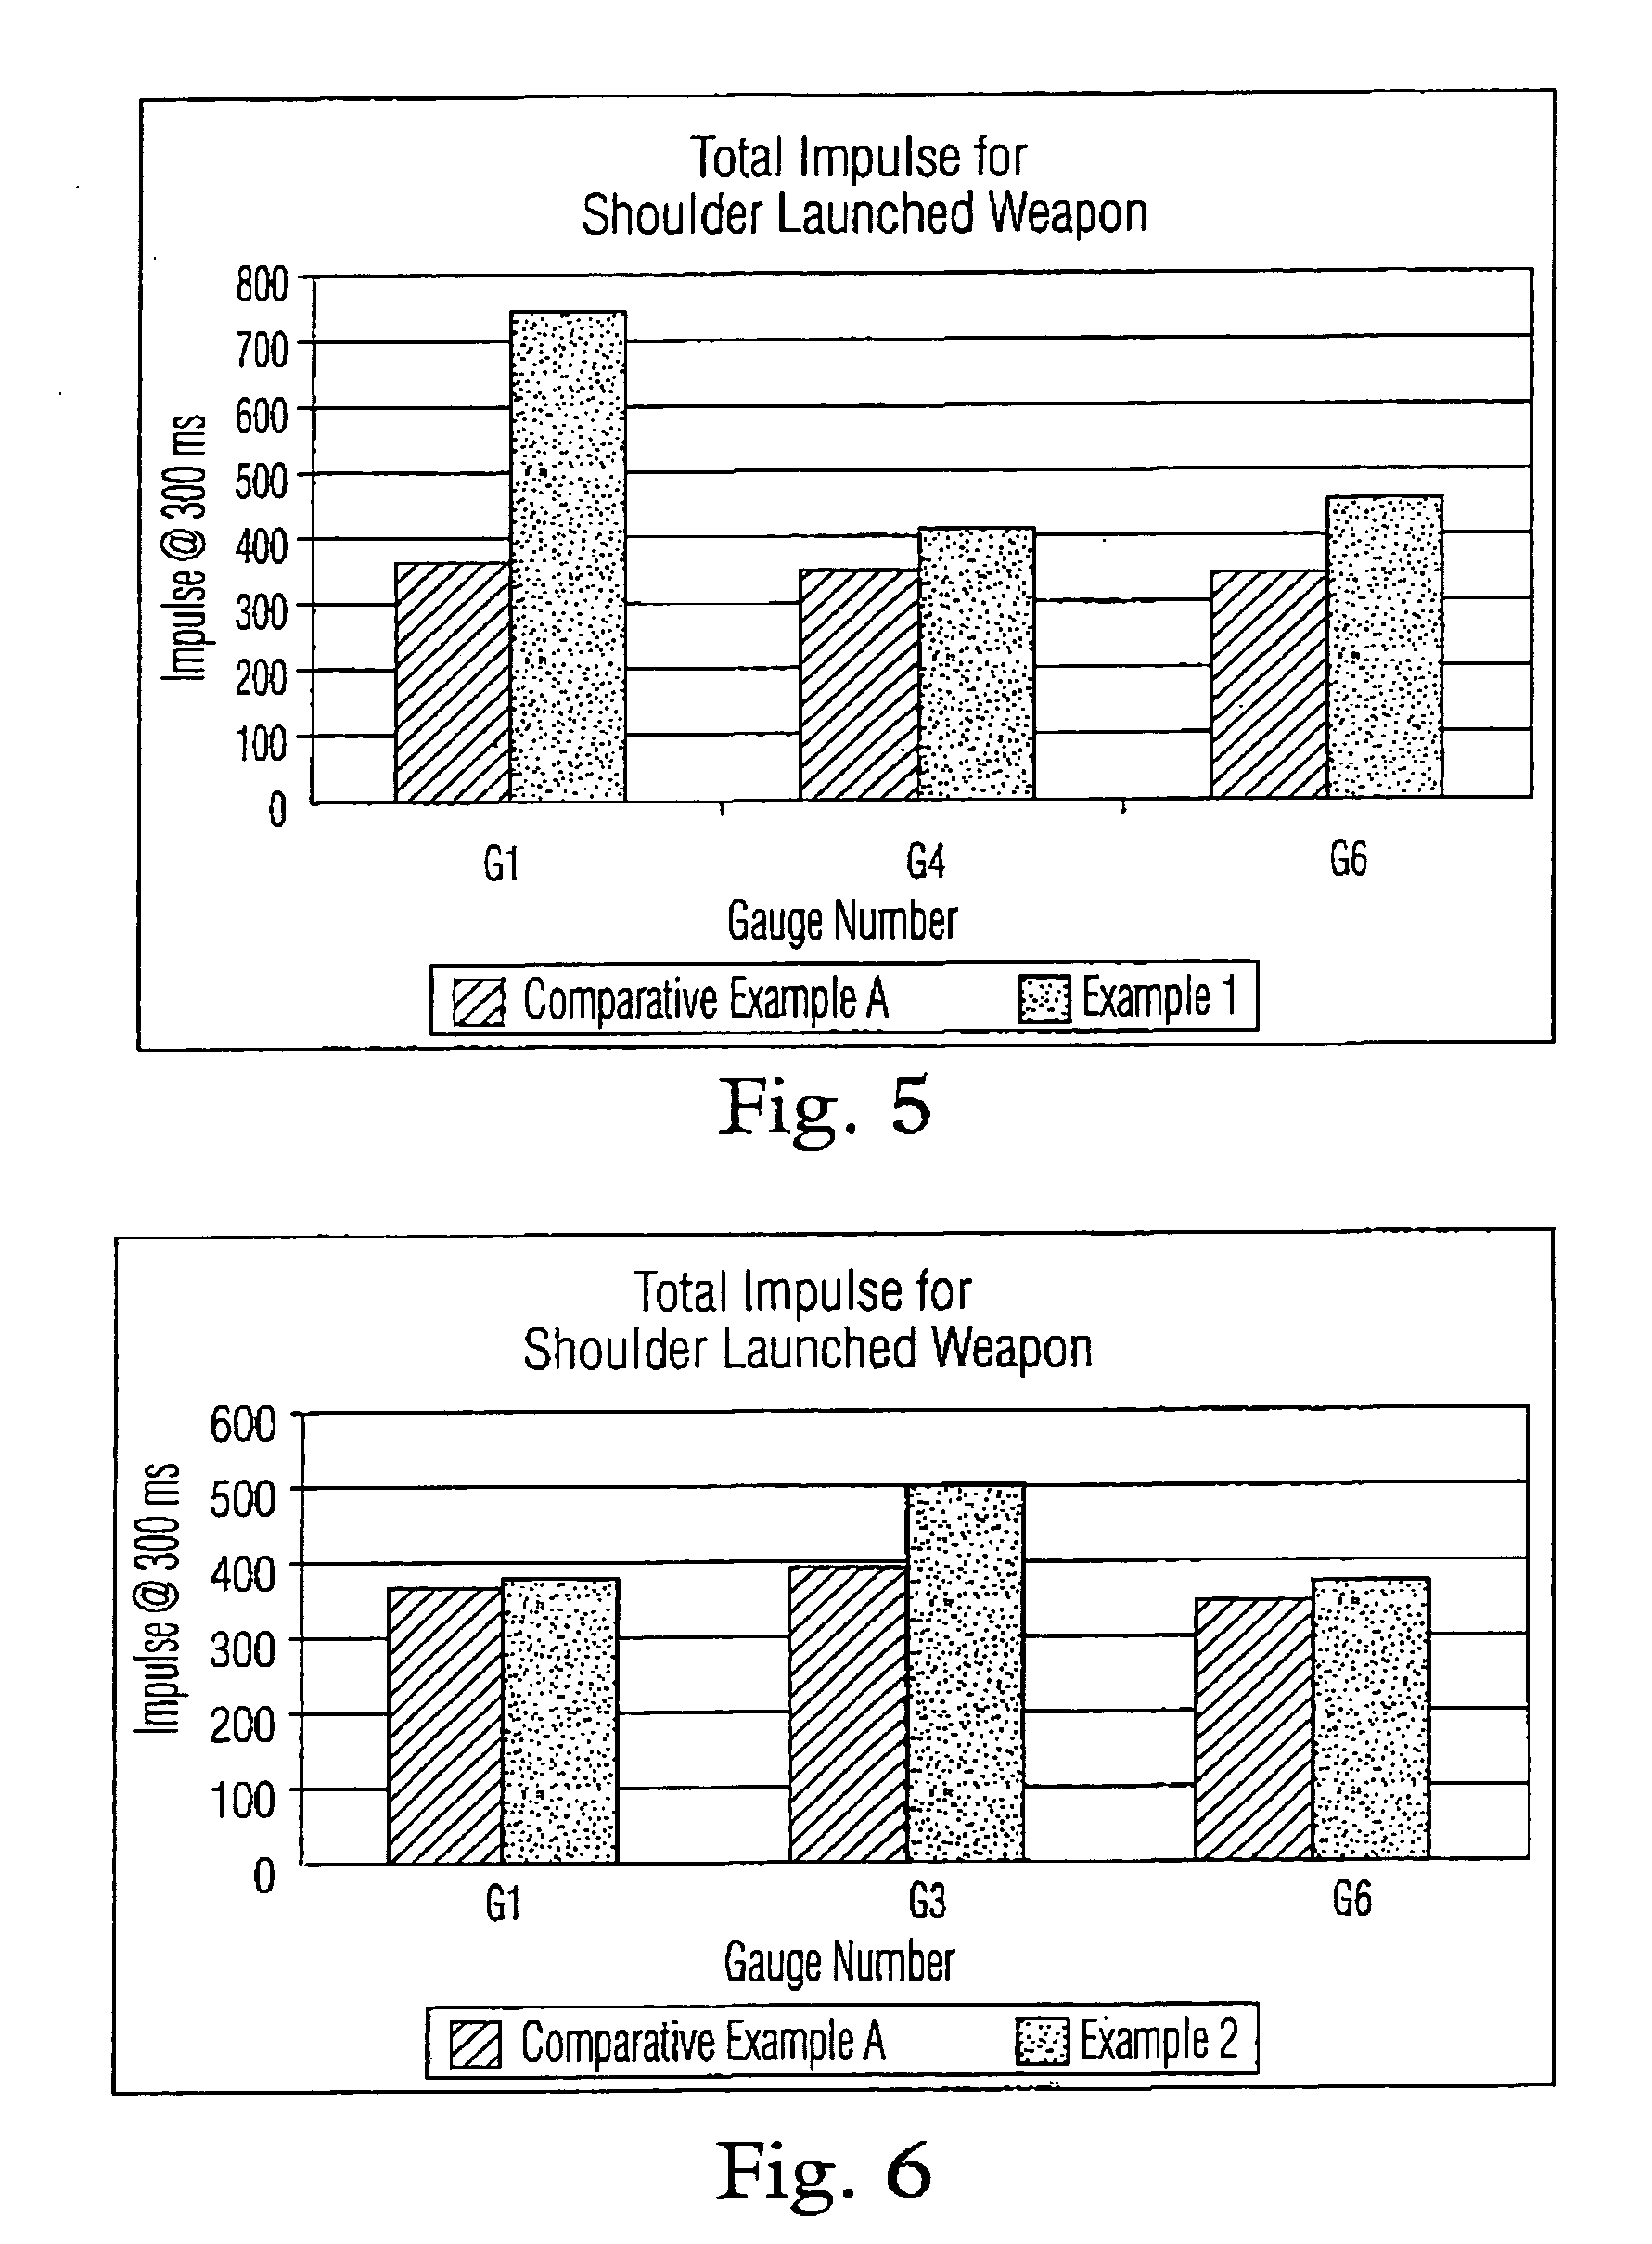 Thermobaric explosives and compositions, and articles of manufacture and methods regarding the same